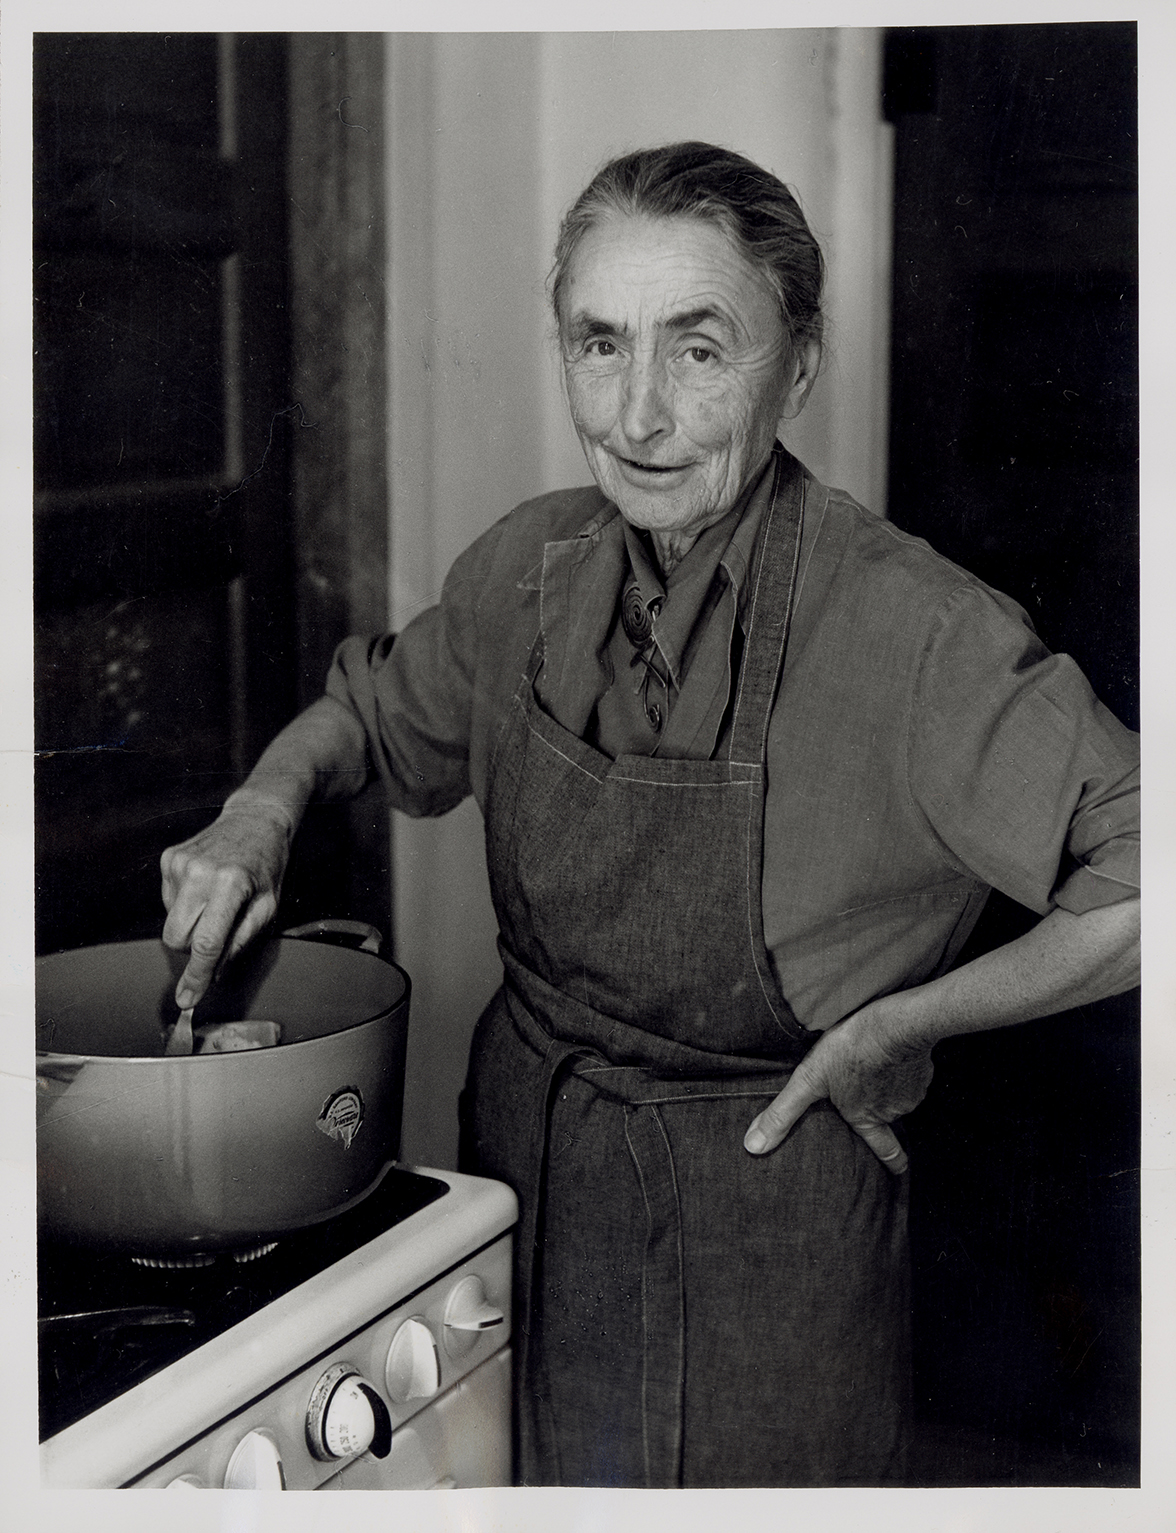 Georgia O'Keeffe at a stove. She wears a denim apron and an open mouth smirk. Her hair is pulled back and she holds a wooden spoon and stirs something on the stove.